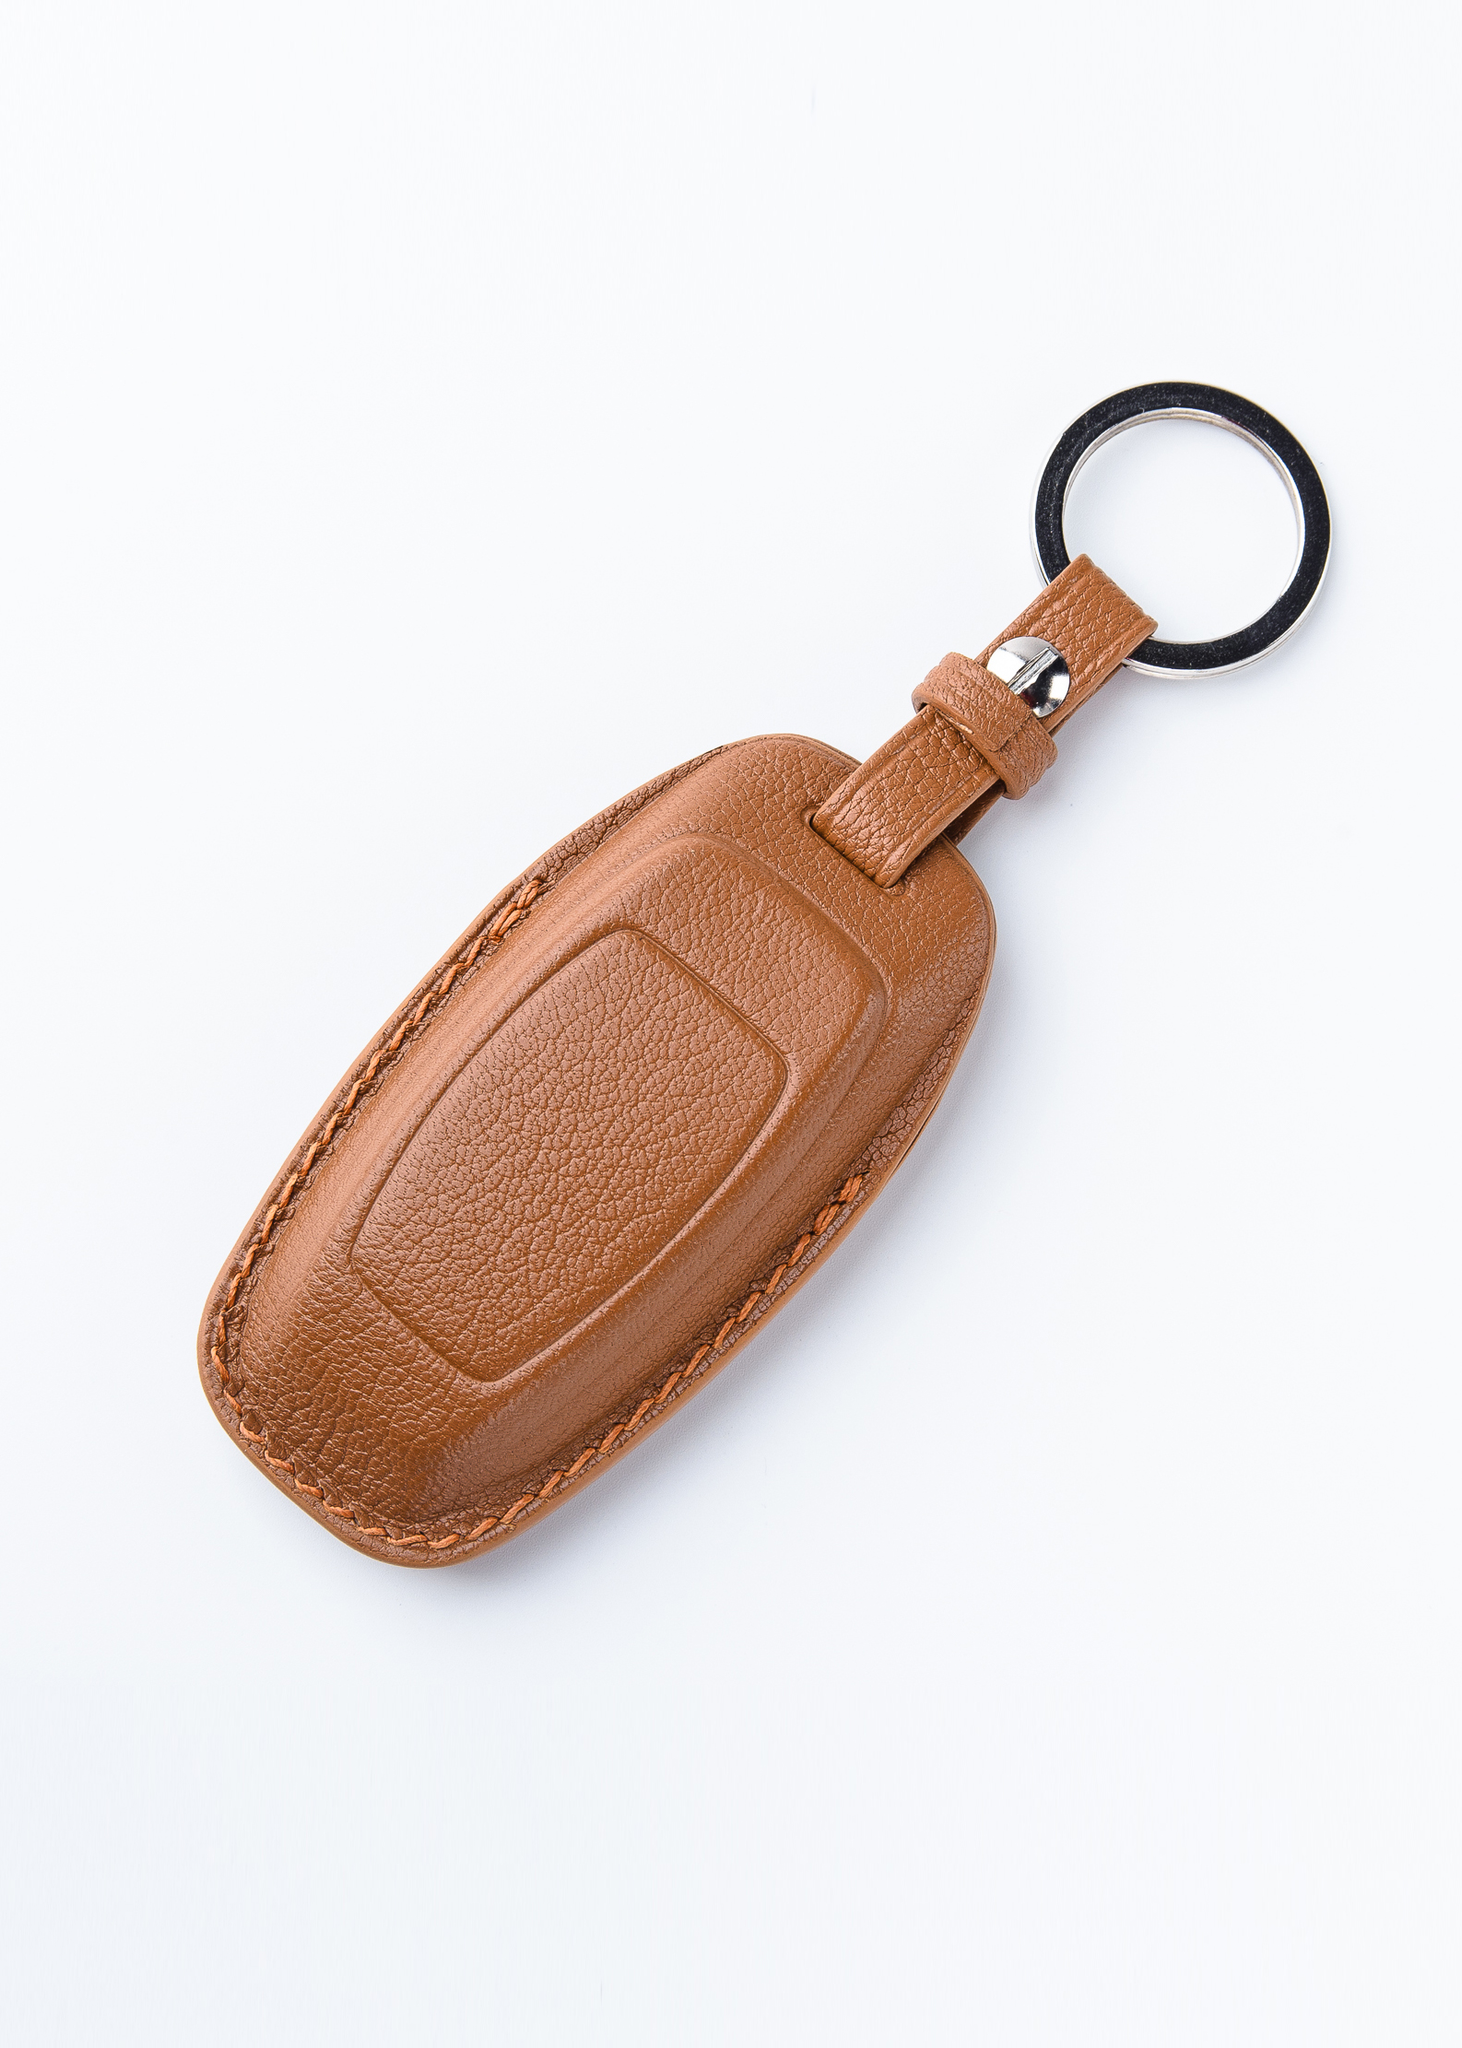 Timotheus for Audi key fob cover case, Compatible with Audi key case, Handmade Genuine Leather for Audi keychains | AU33